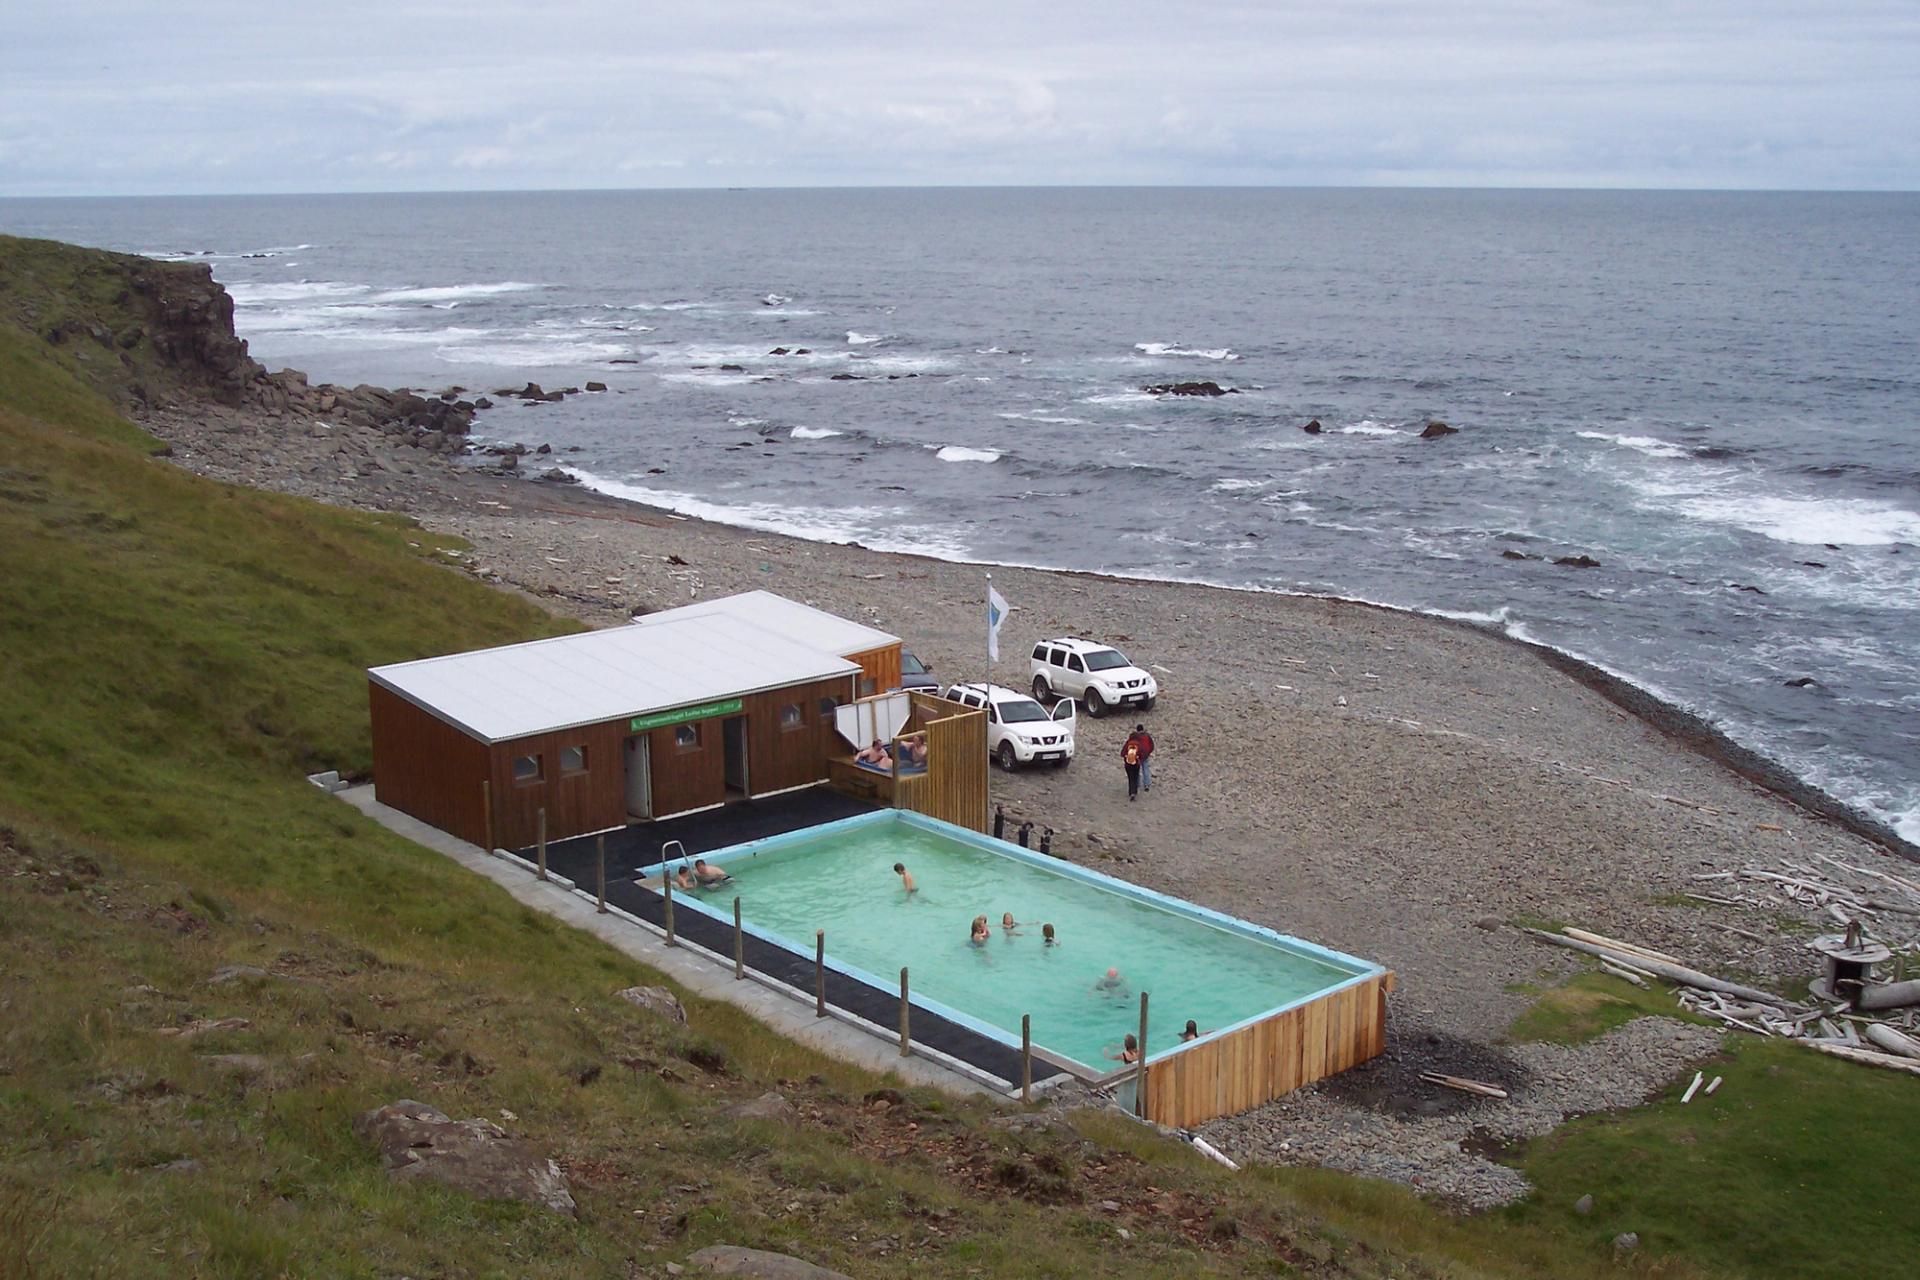 A geothermal pools with natural hot water located near cold water in north iceland